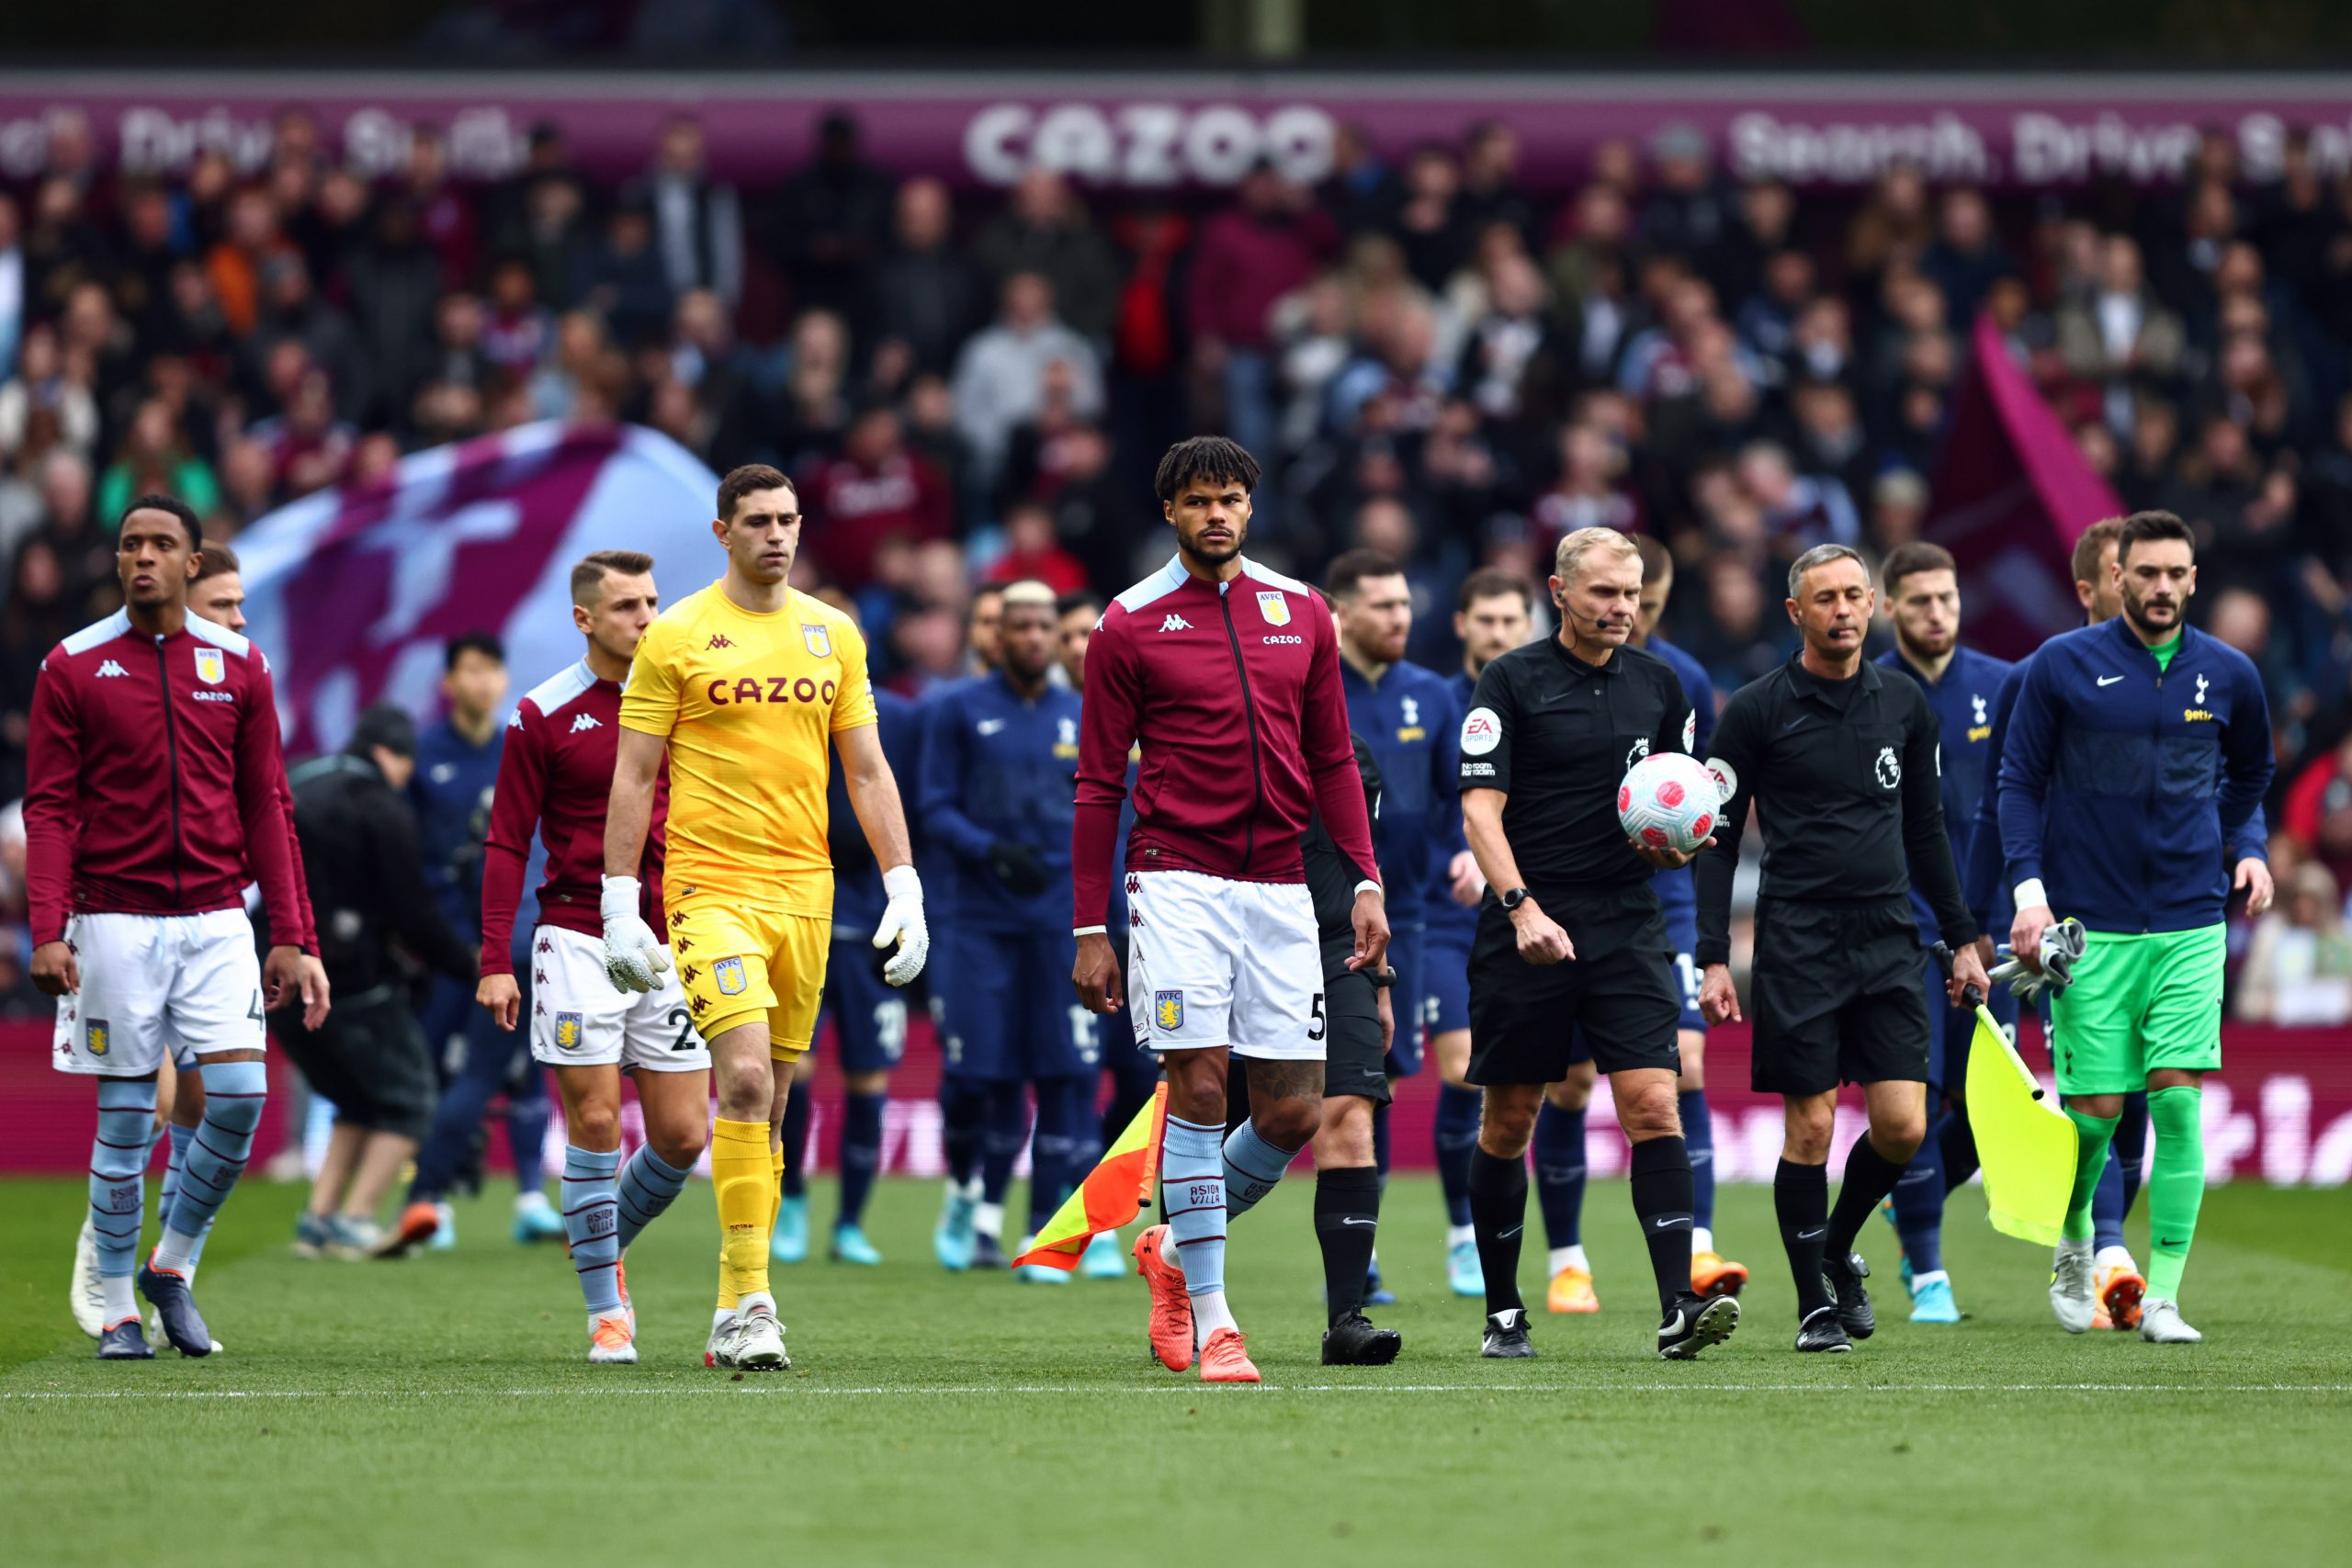 Aston Villa players after a disappointing loss to Spurs